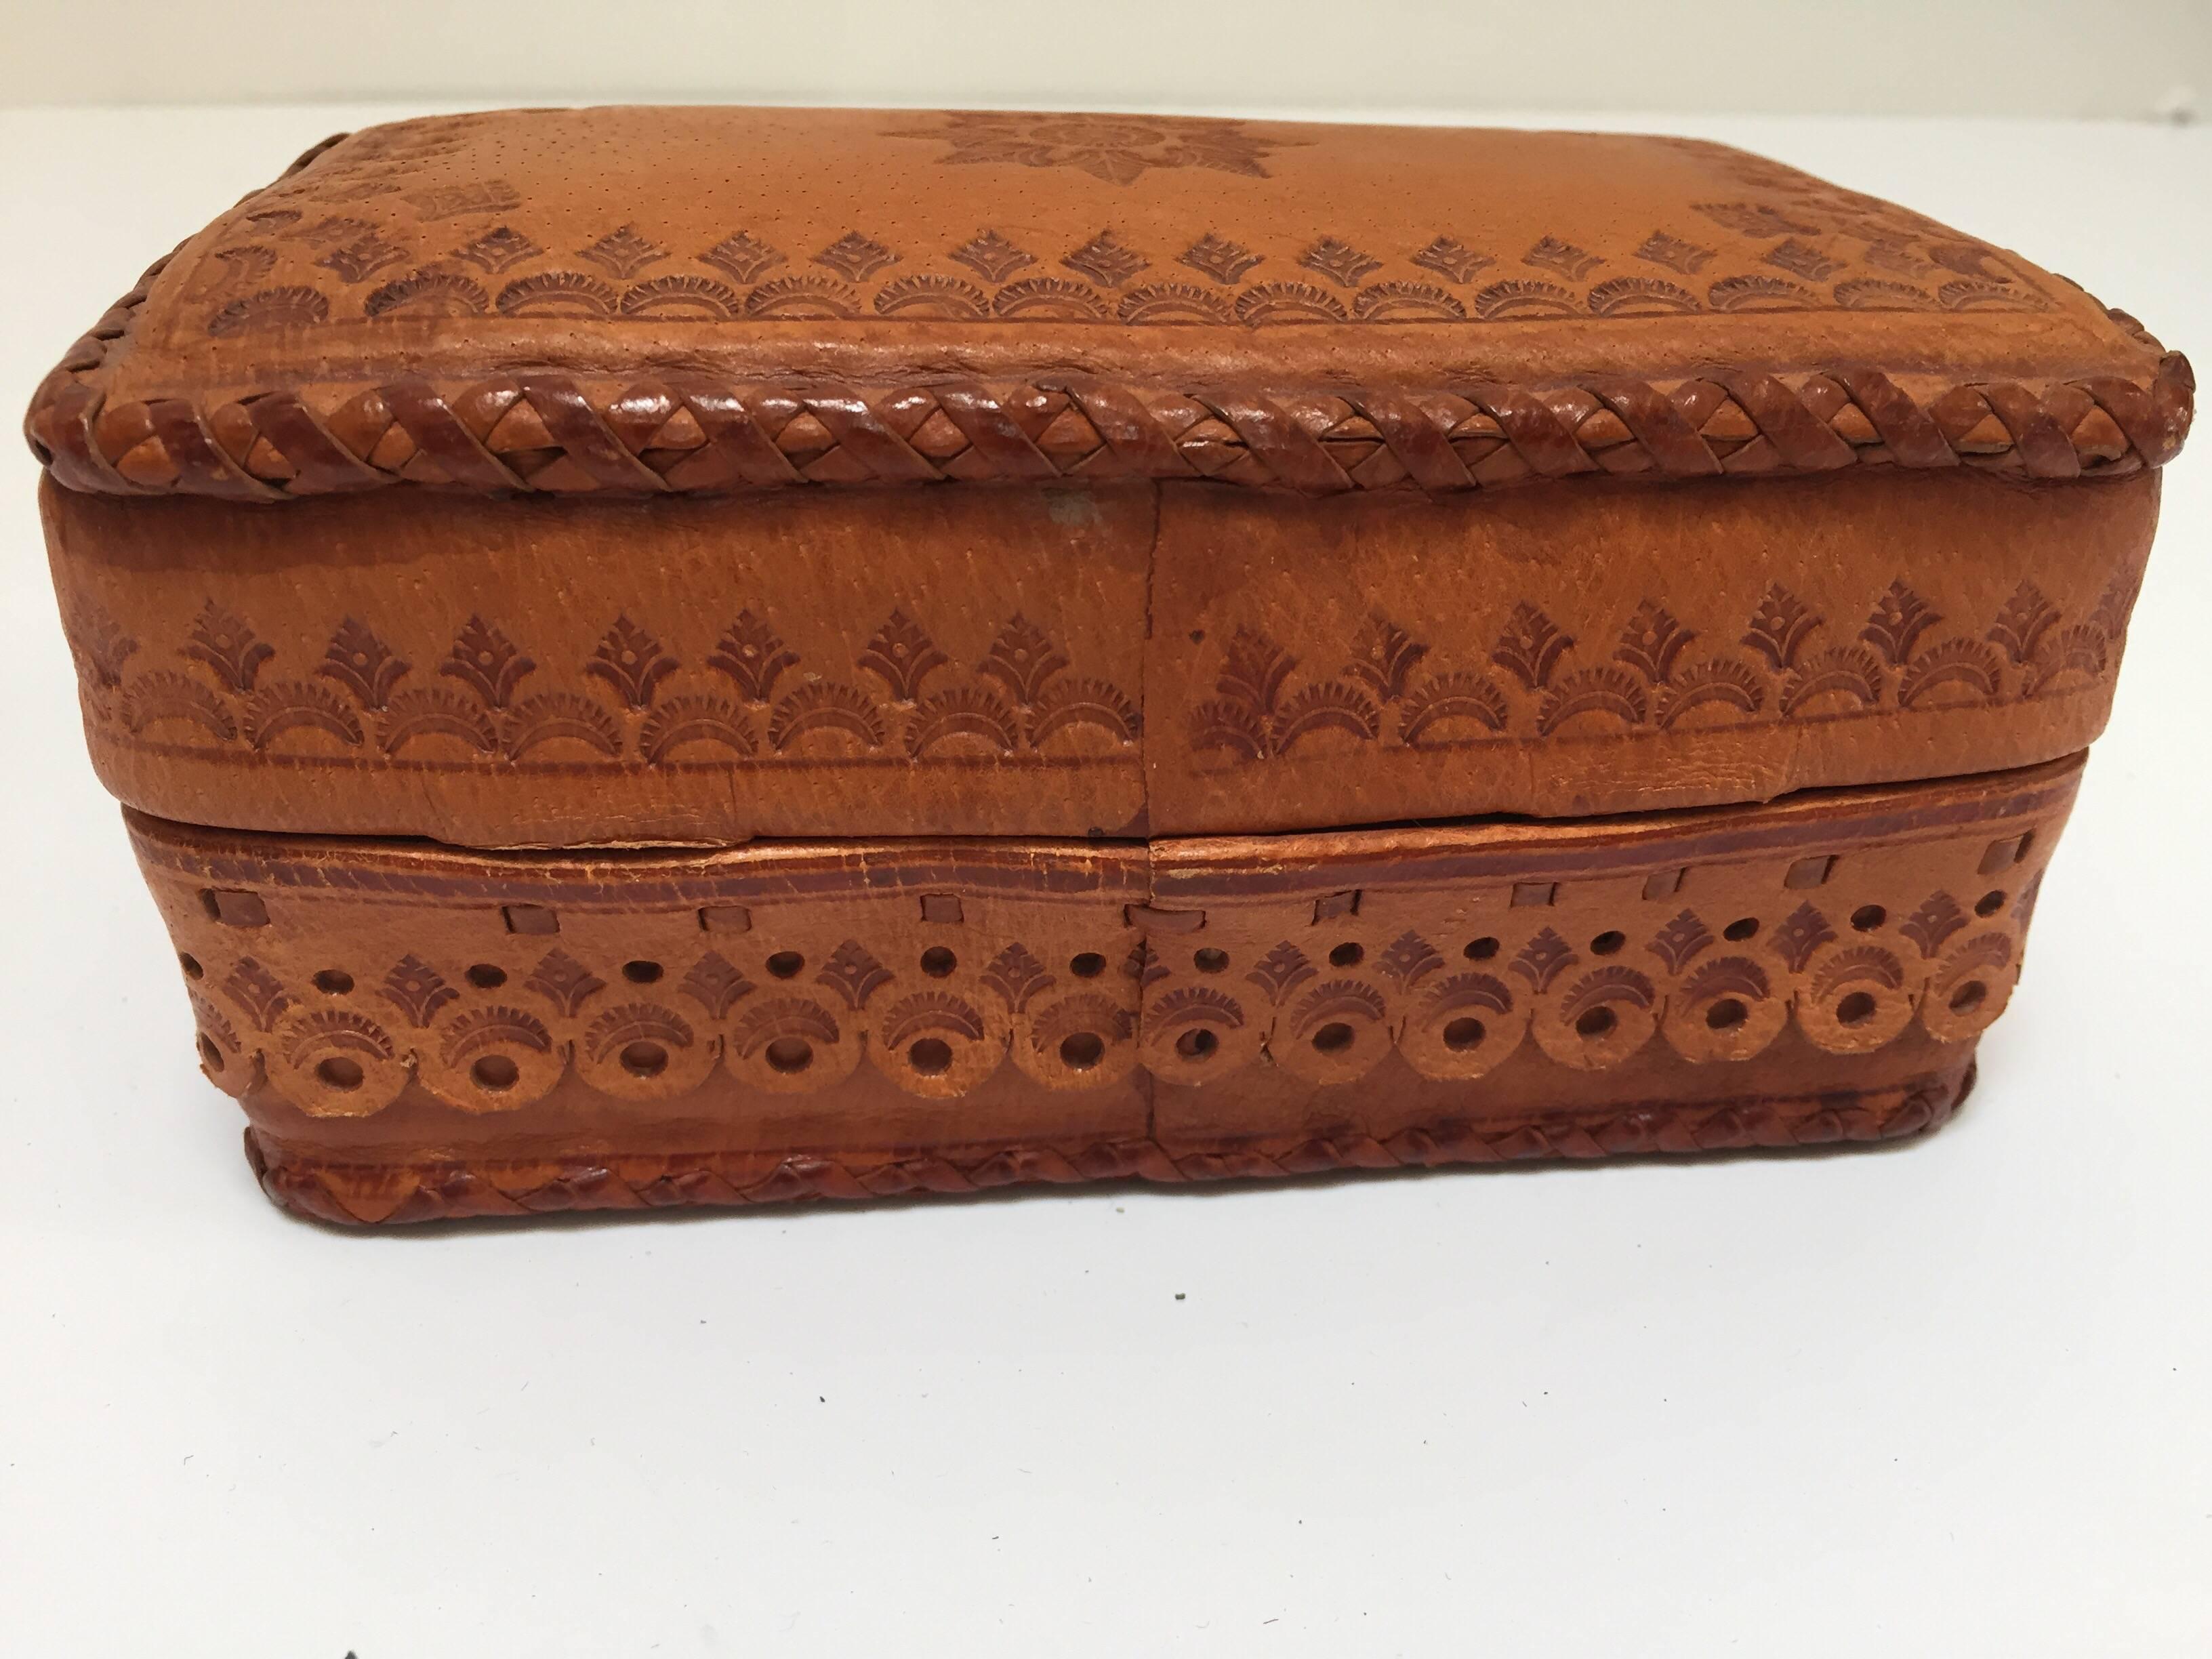 Leather Vintage Brown Box Hand Tooled in Morocco with Tribal African Designs 2